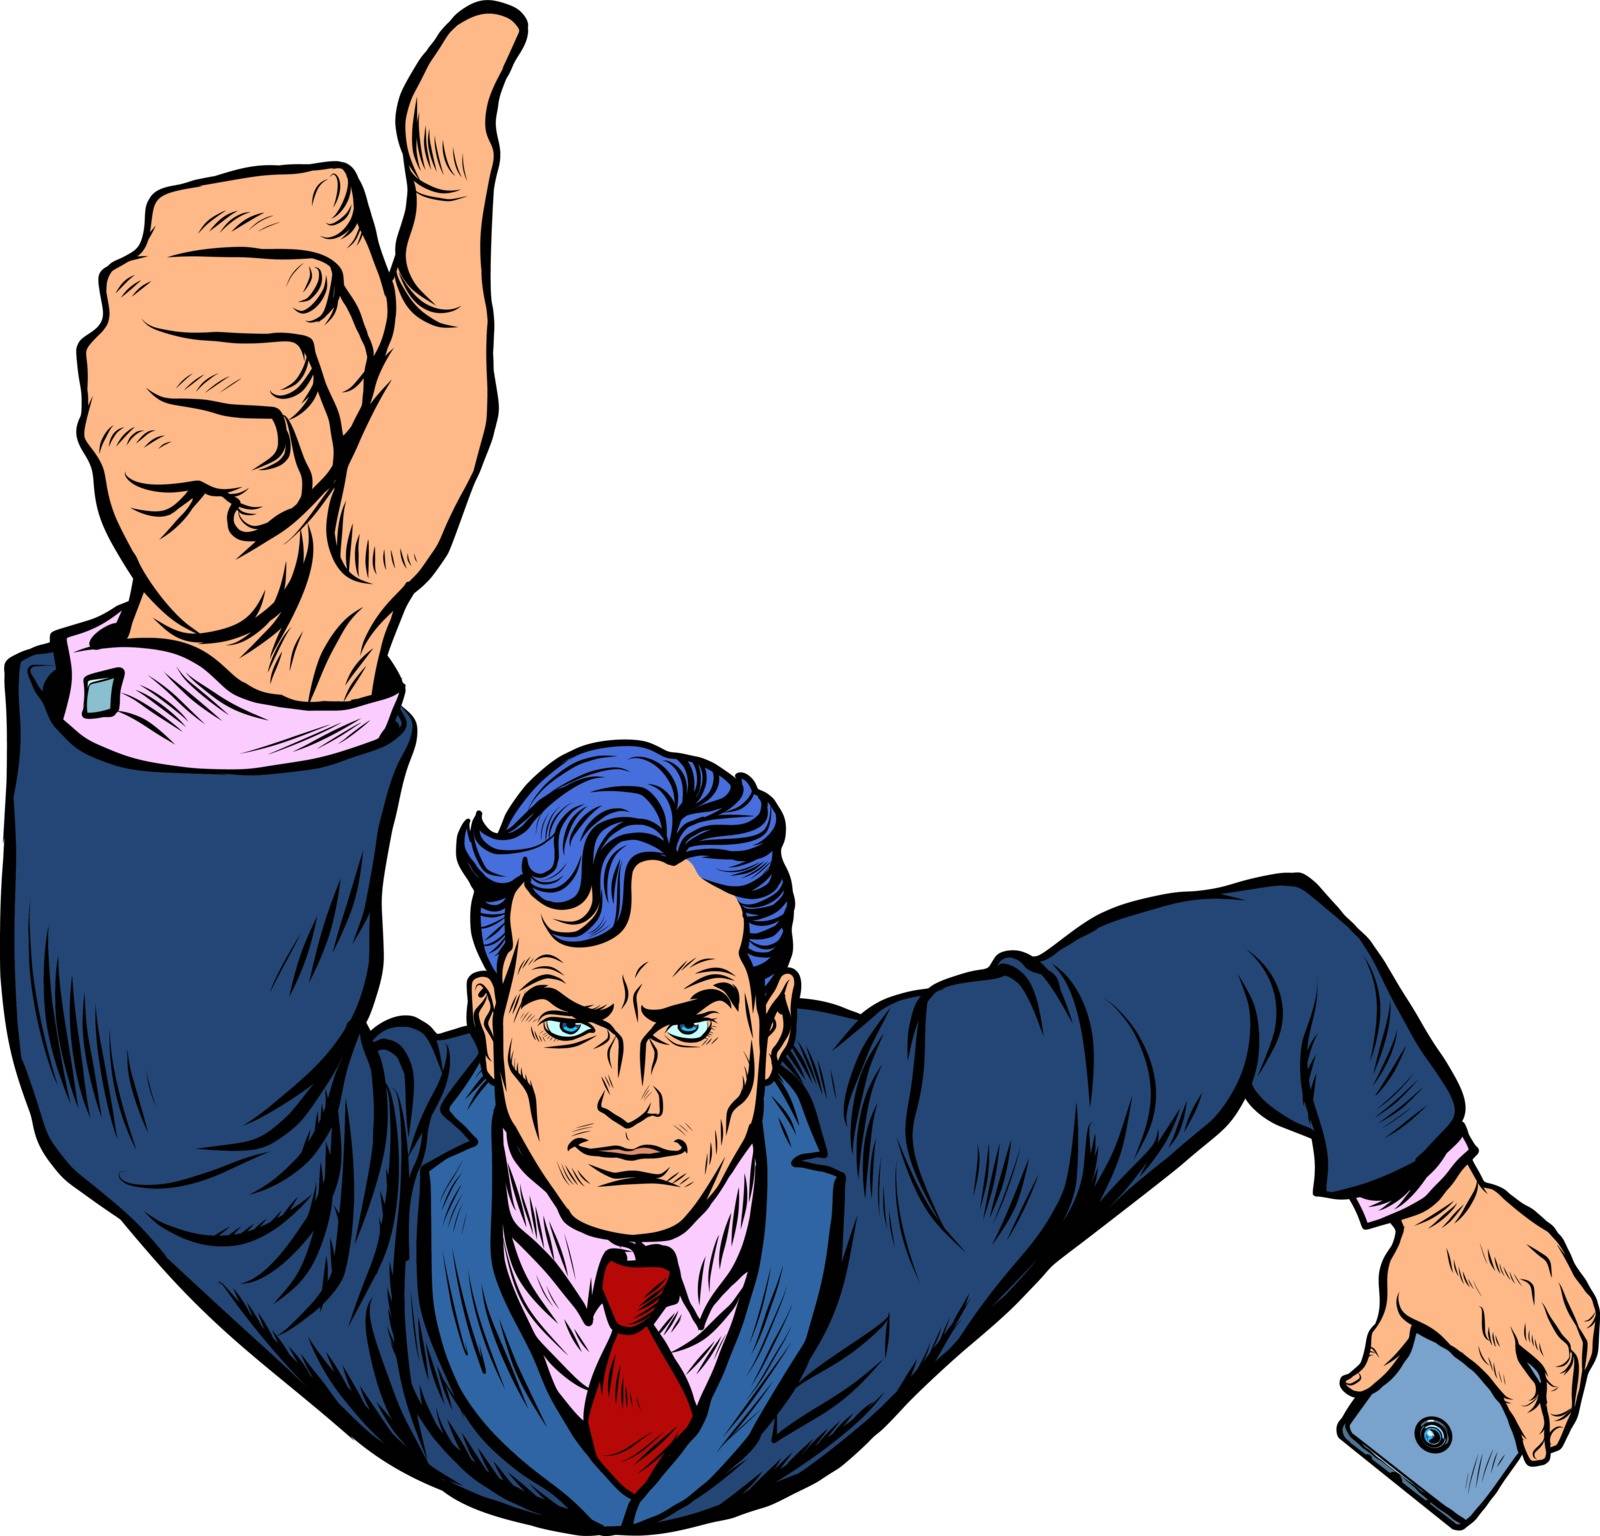 A businessman with a smartphone like, thumbs up. Flying like a superhero. Pop art retro vector illustration 50s 60s style